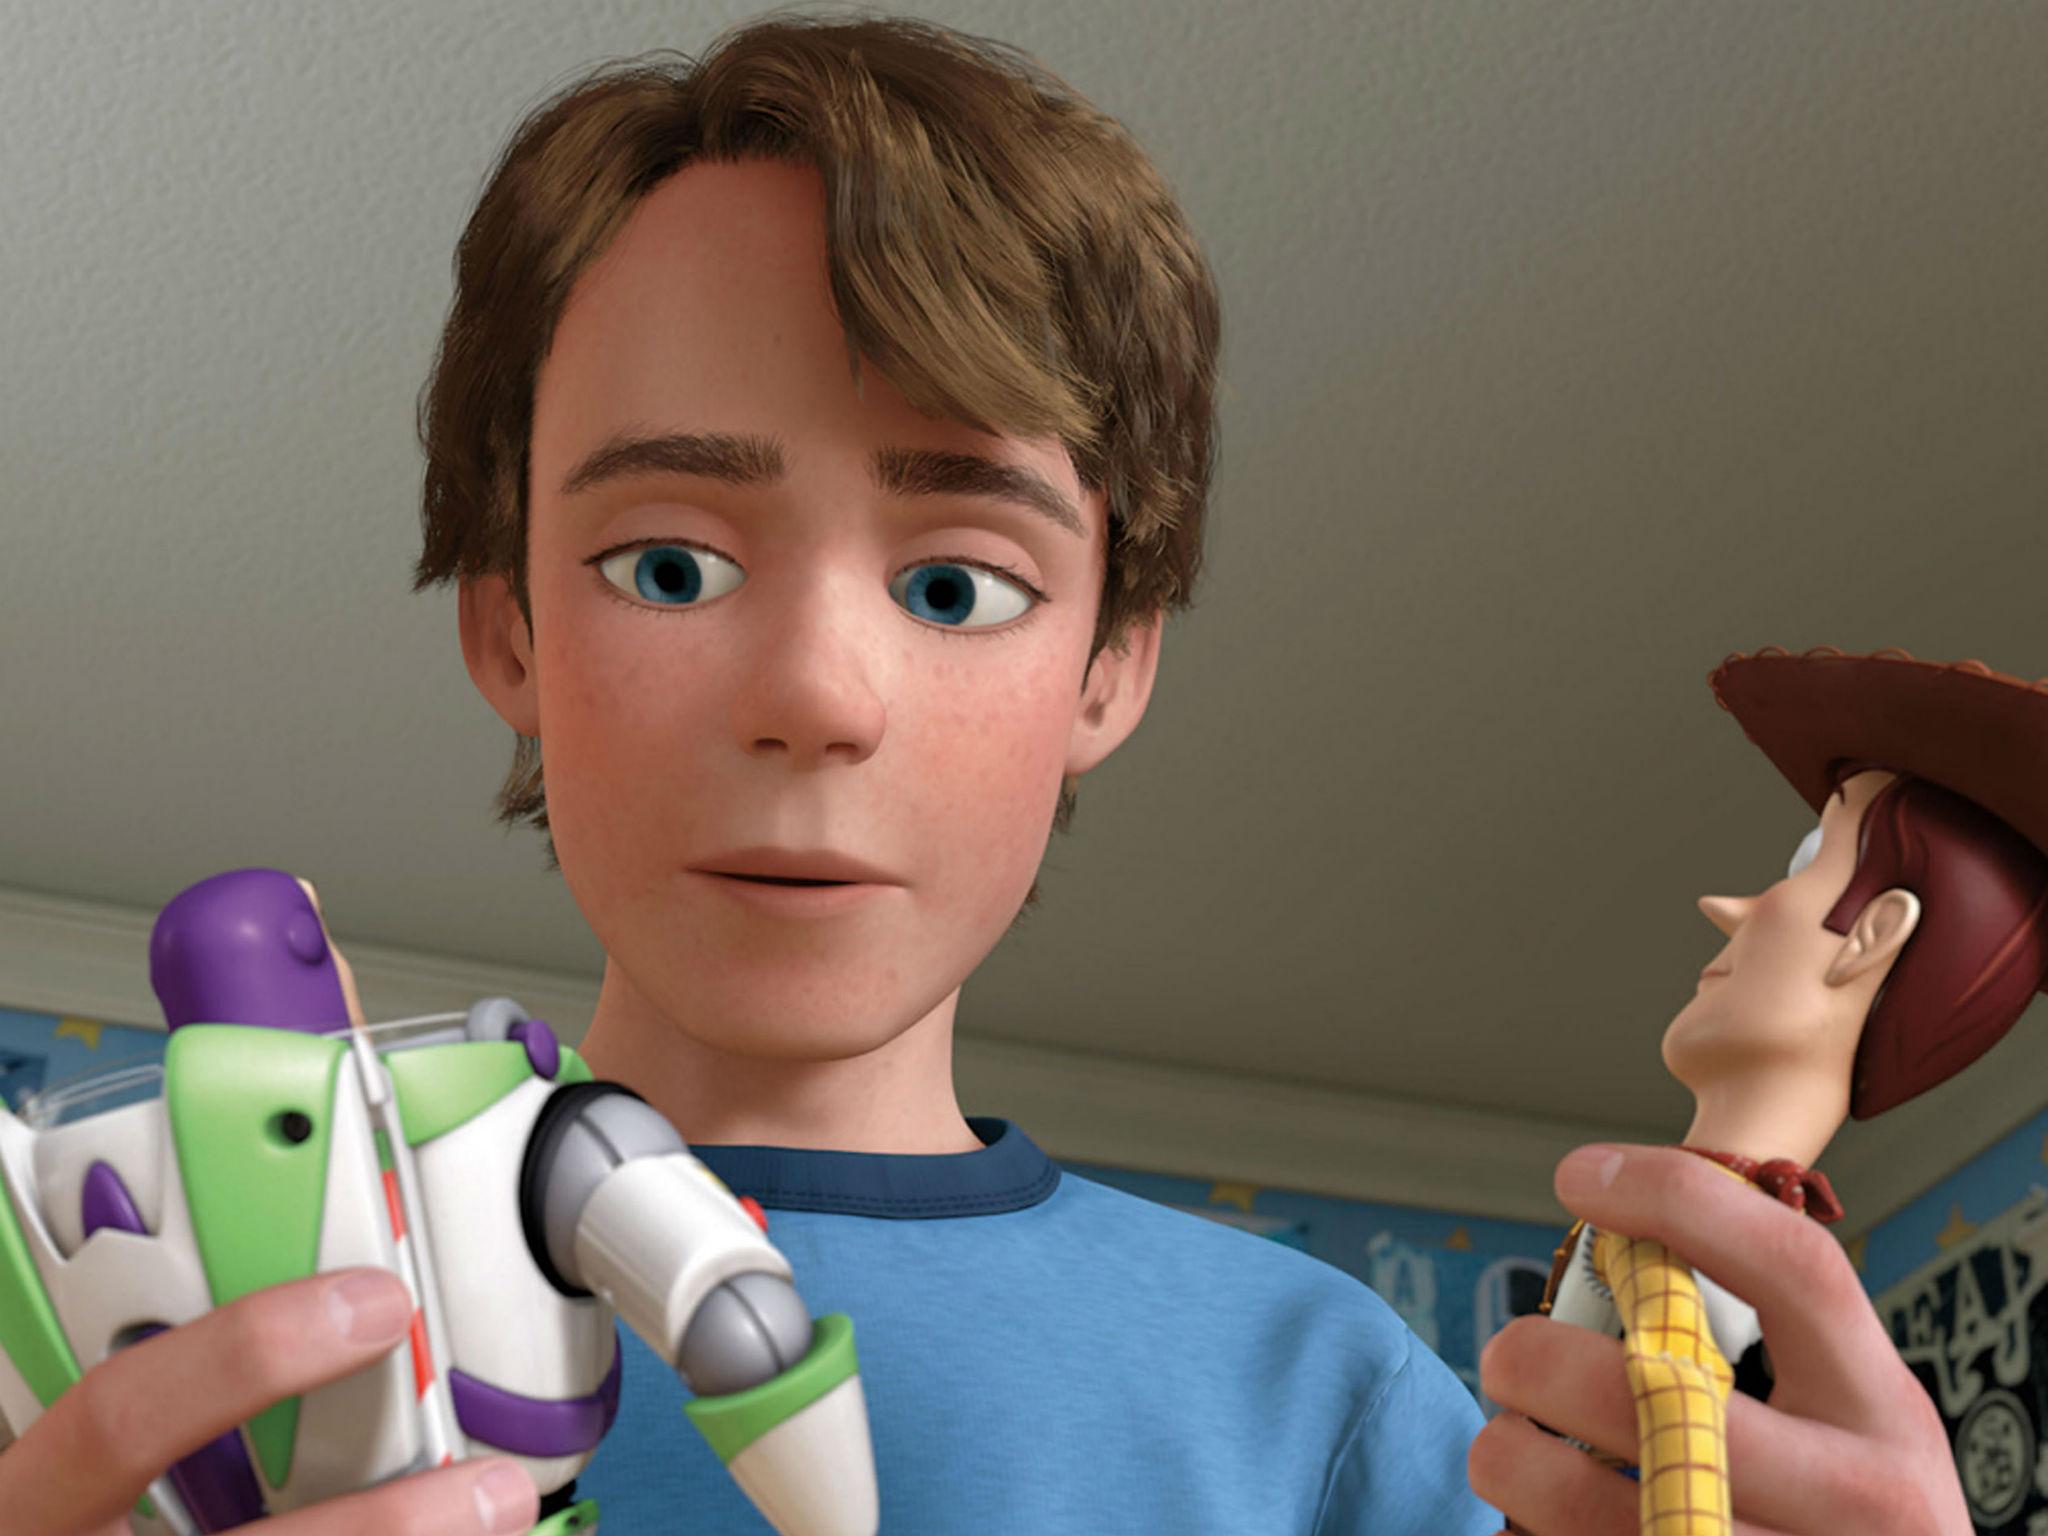 ‘Some told me Toy Story was too intense on kids but parents naturally want to protect them from having those feelings’